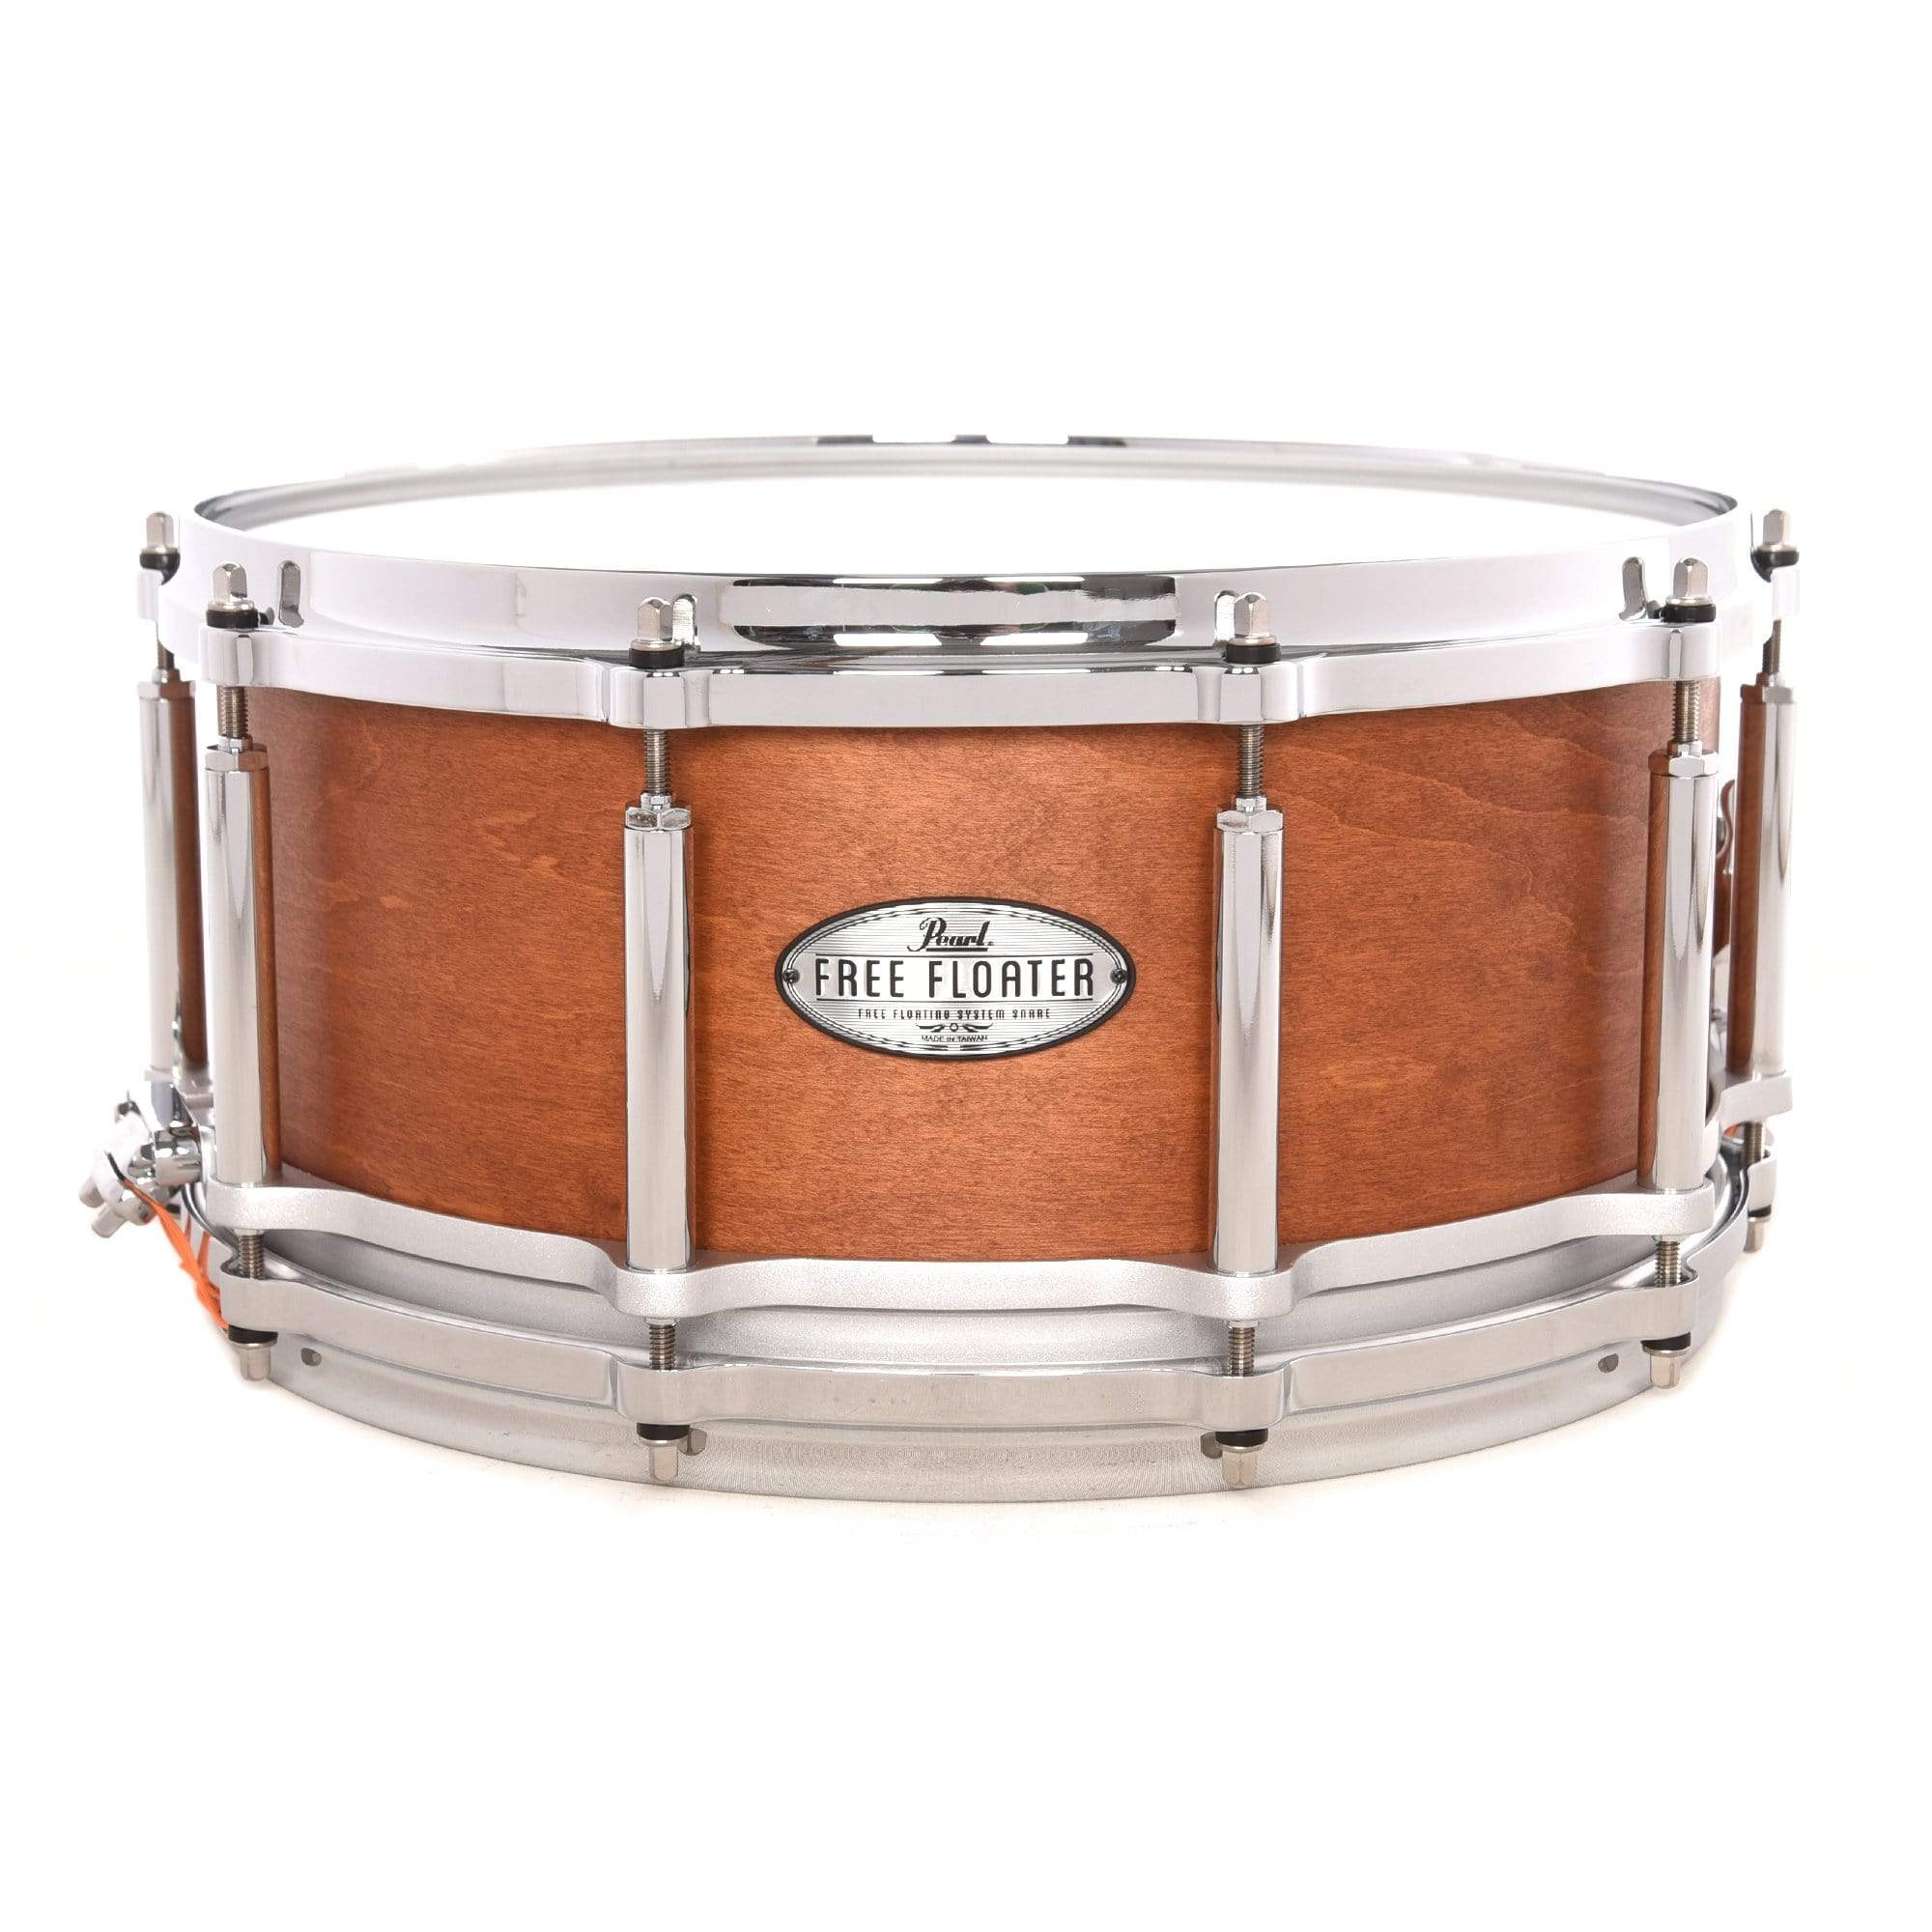 Maple/Mahogany　Music　Drum　Free　Snare　Floating　Chicago　–　Exchange　Pearl　6.5x14